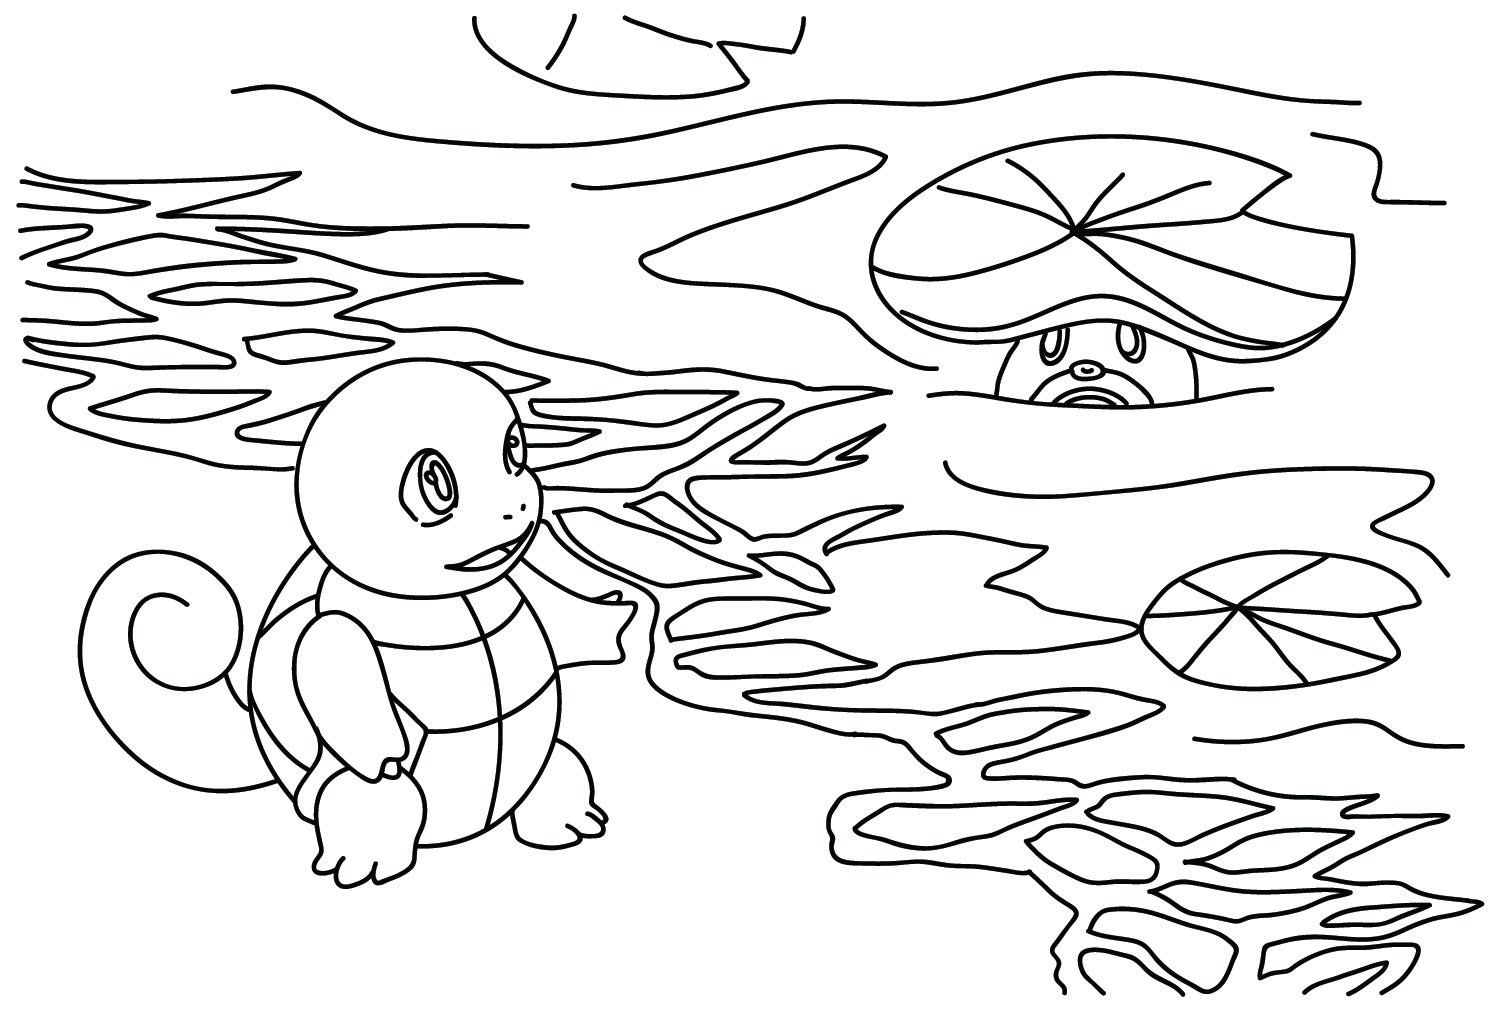 Squirtle Picture to Color from Squirtle